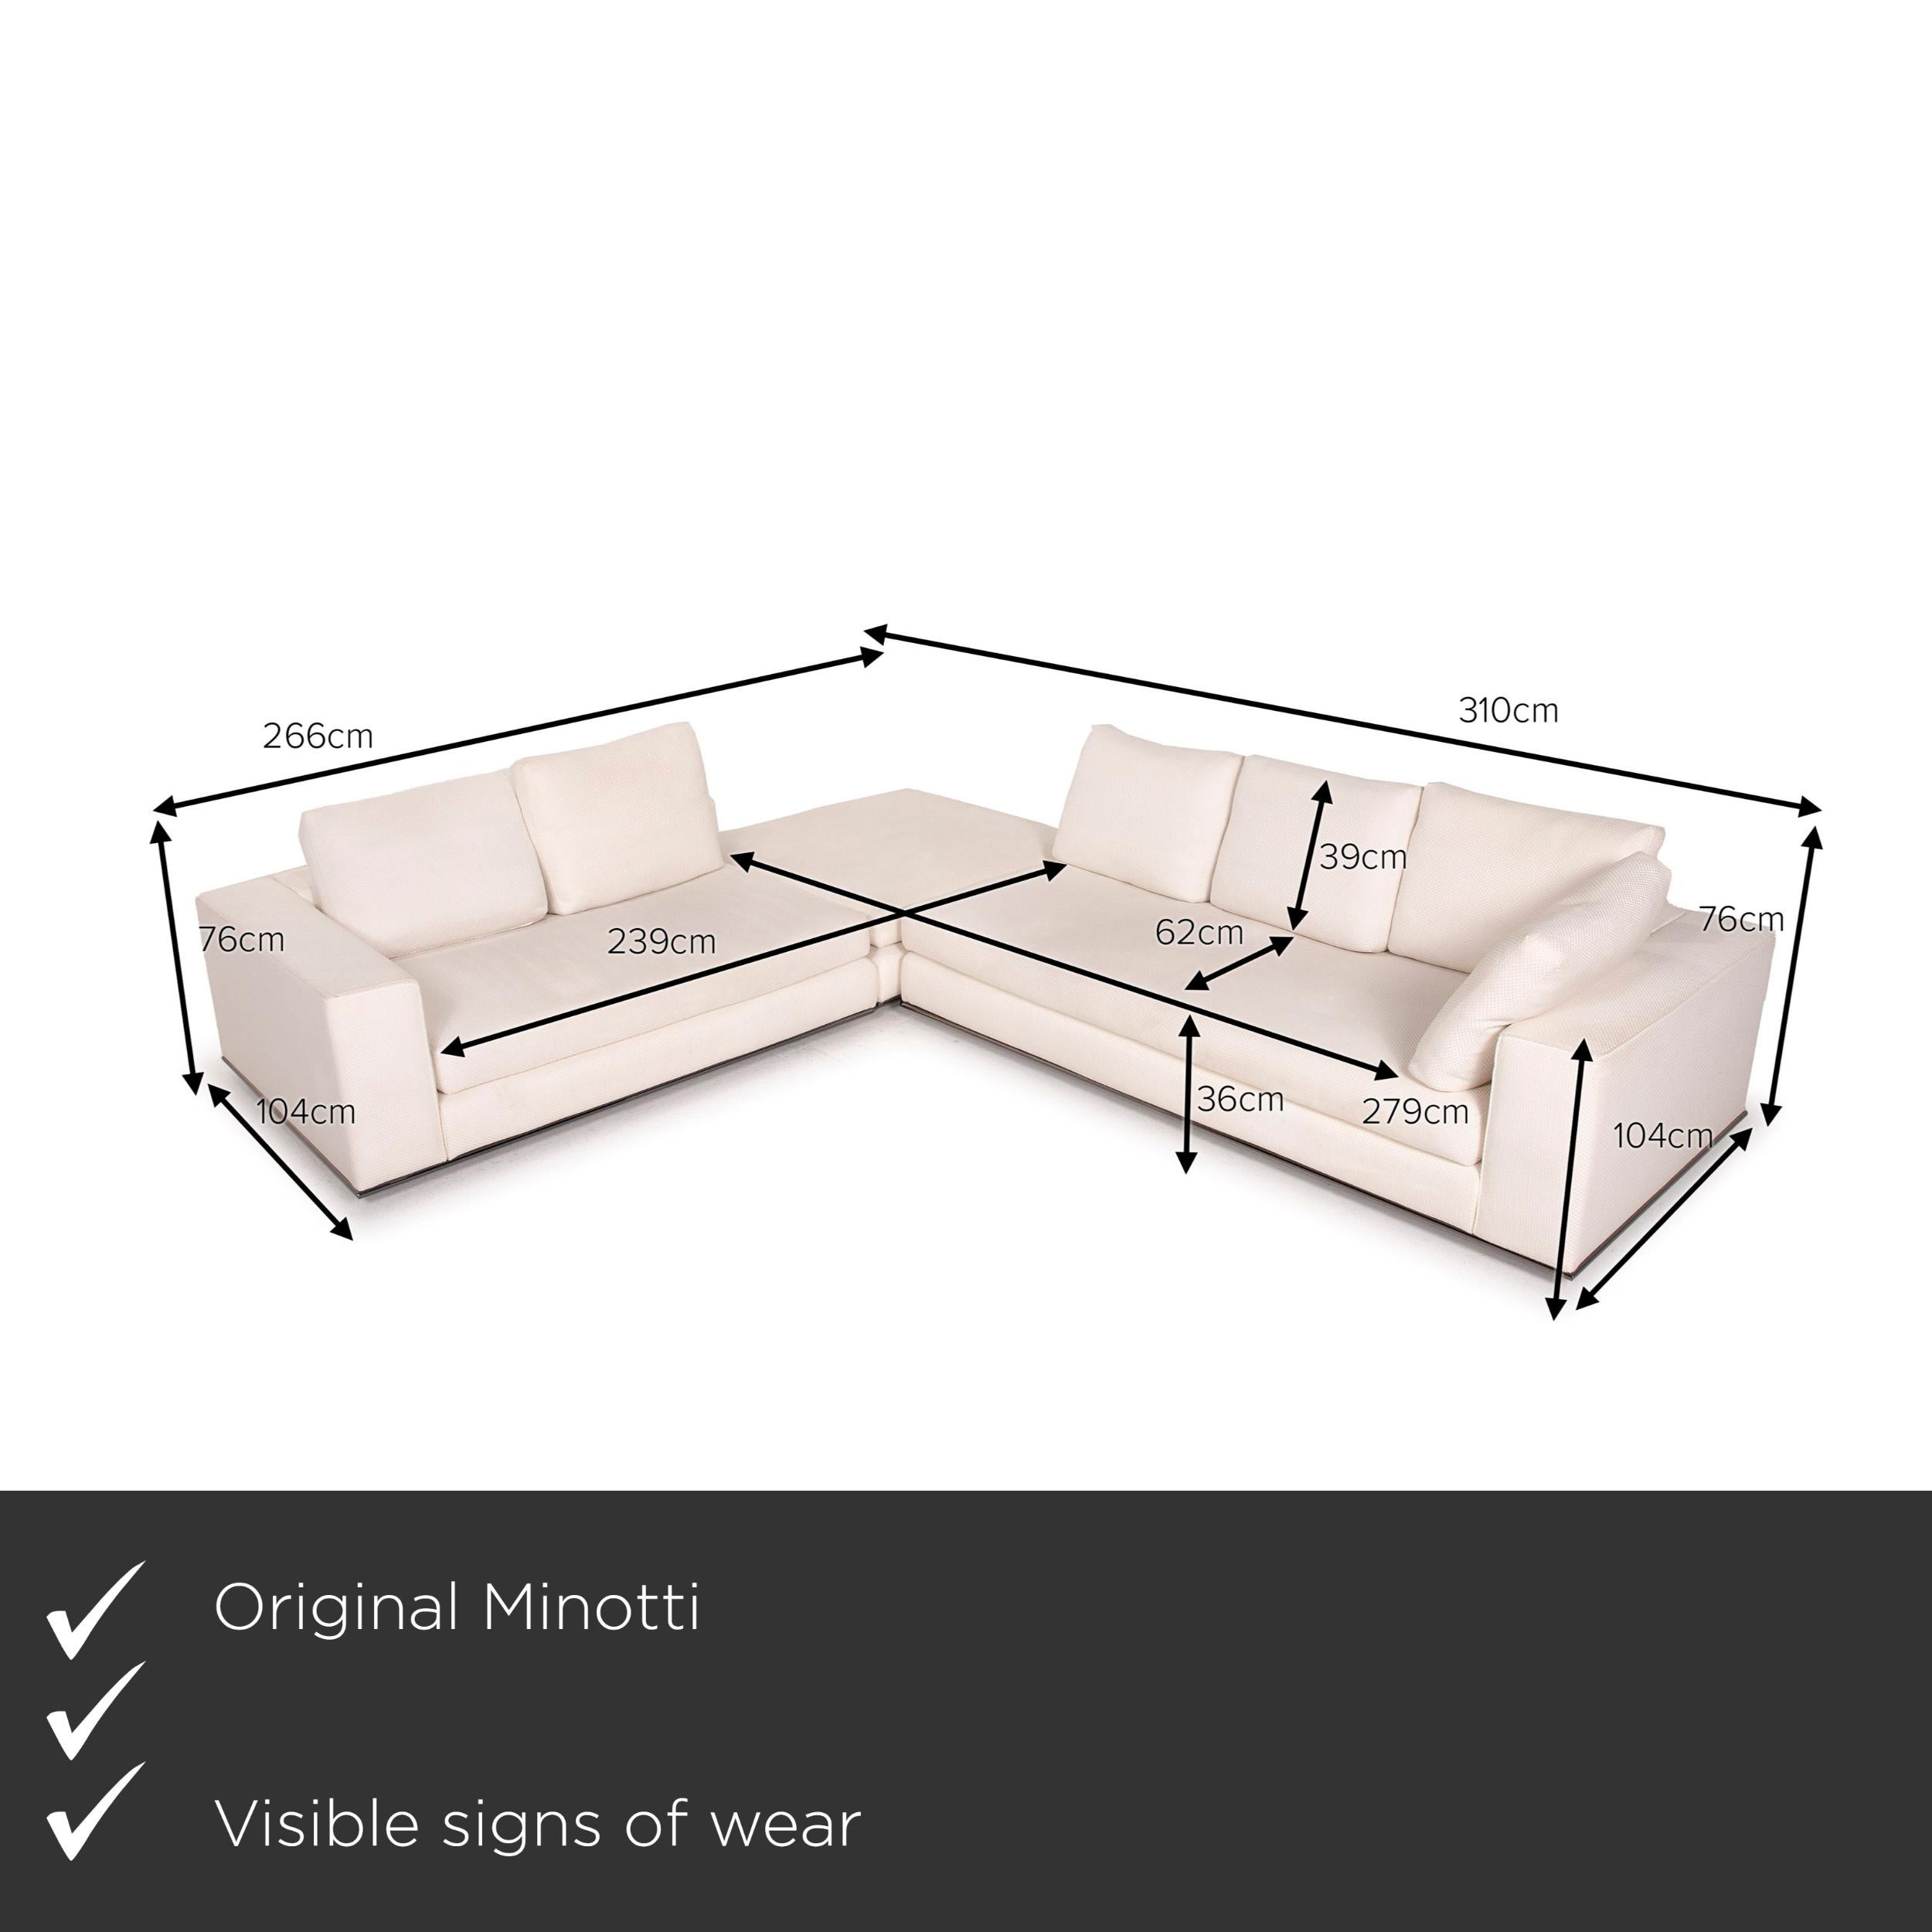 We present to you a Minotti Hamilton fabric sofa ivory corner sofa module.


 Product measurements in centimeters:
 

Depth: 104
Width: 266
Height: 76
Seat height: 36
Rest height: 56
Seat depth: 62
Seat width: 239
Back height: 39.
 